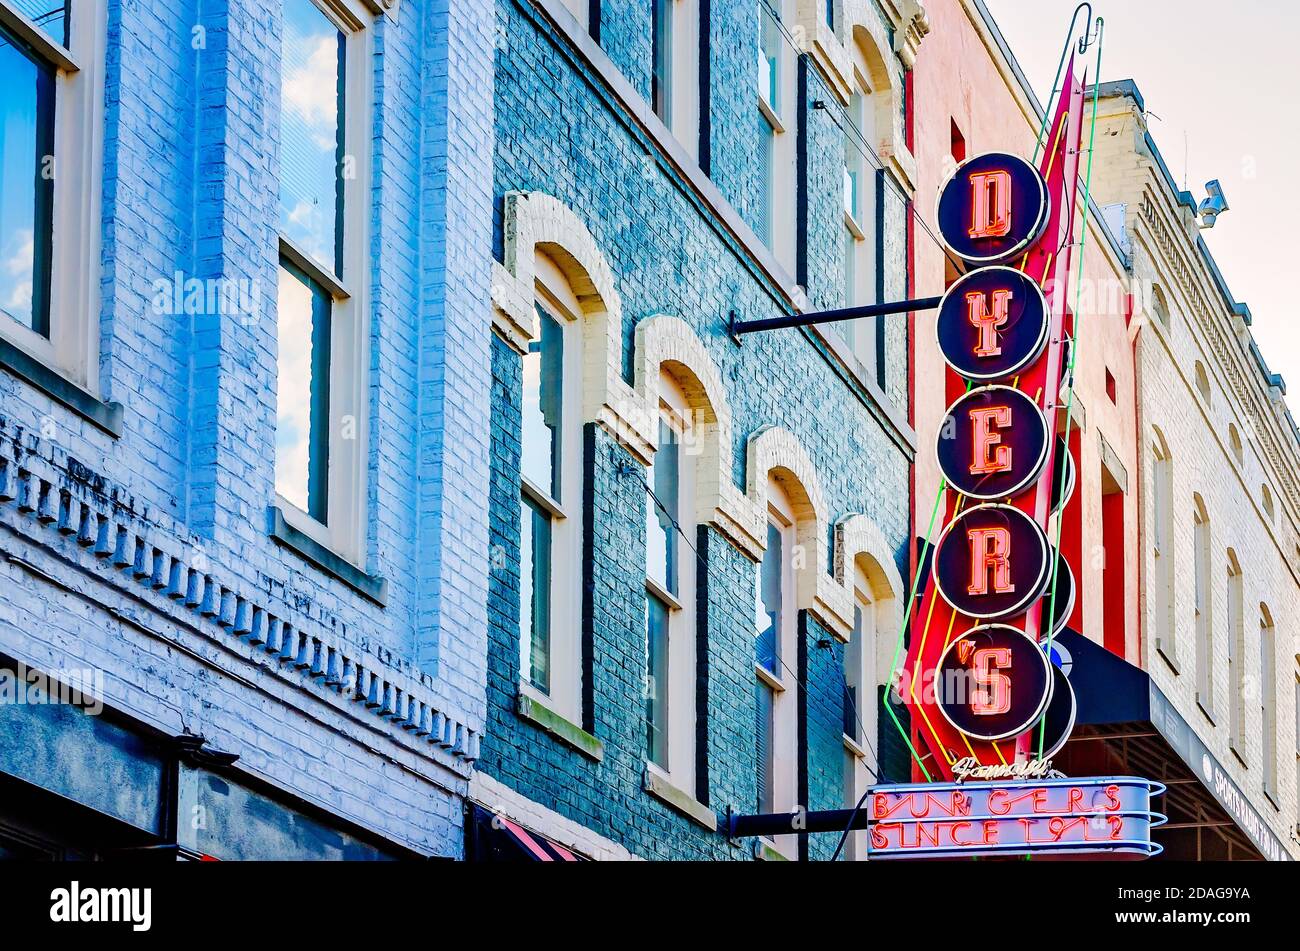 A neon sign hangs above Dyer’s Burgers on Beale Street, Sept. 12, 2015, in Memphis, Tennessee. Dyer’s opened in 1912. Stock Photo